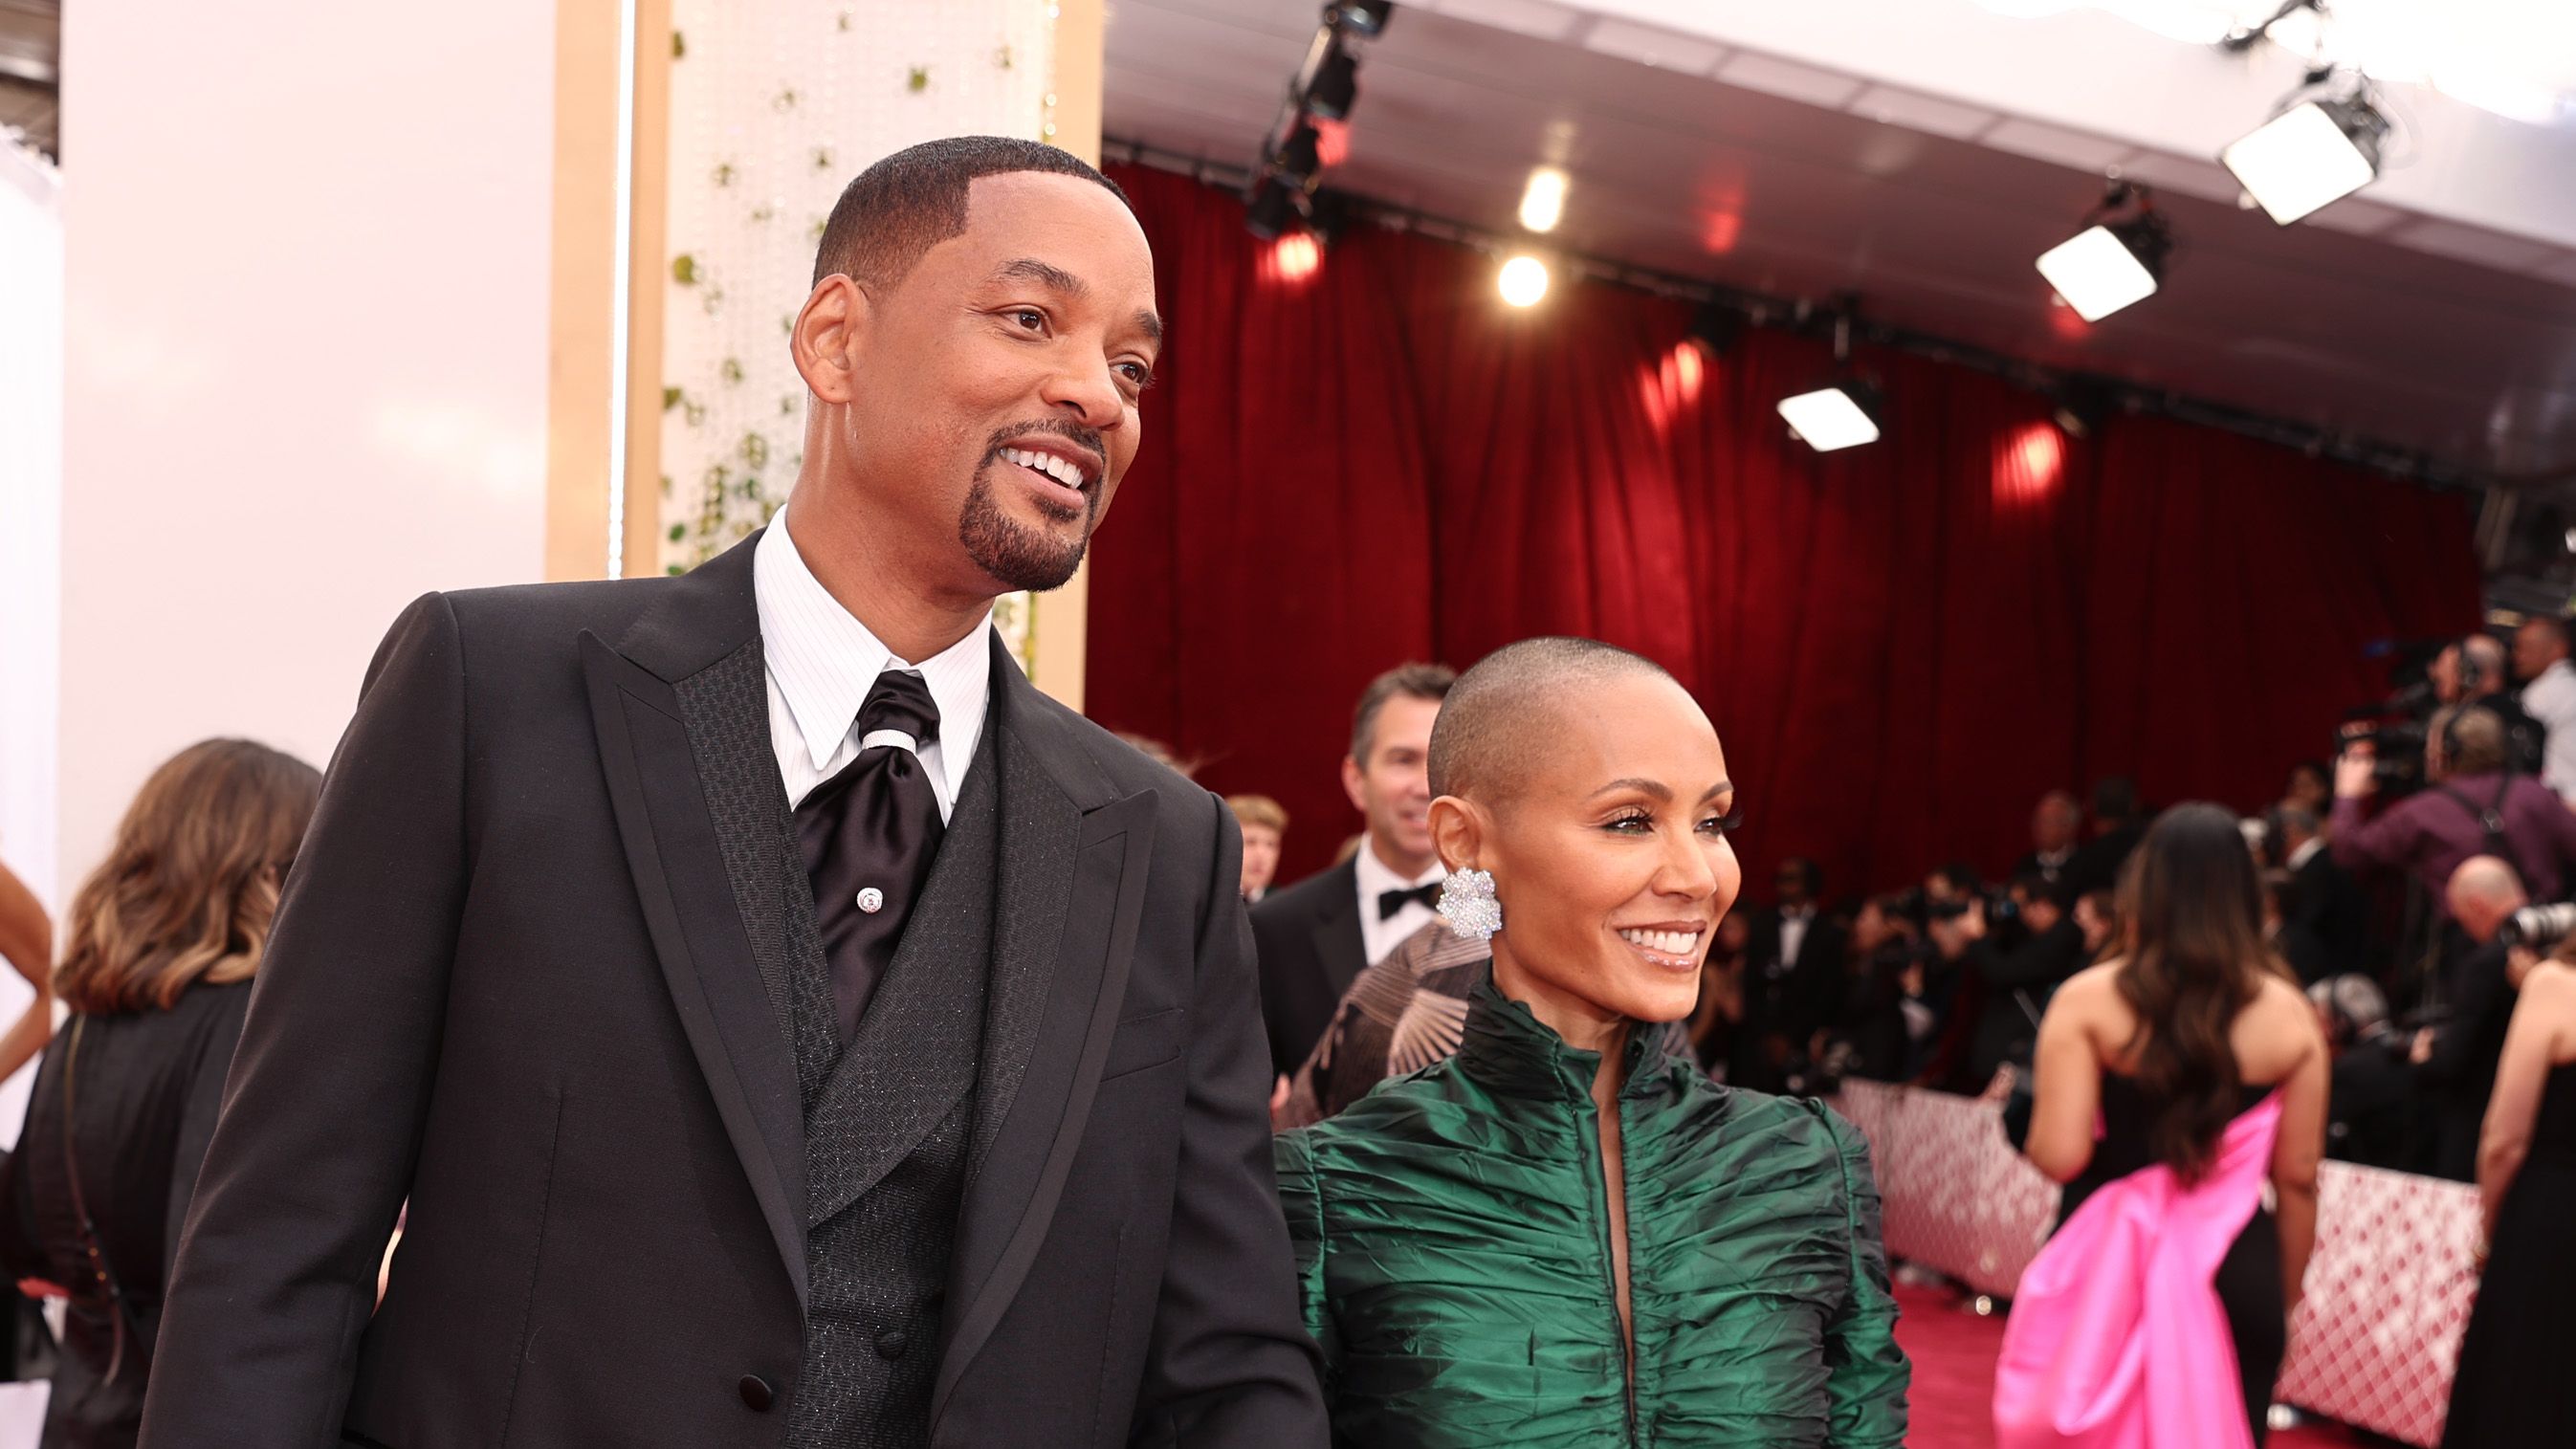 Will Smith has perfect 'Fresh Prince of Bel-Air' walk-up song